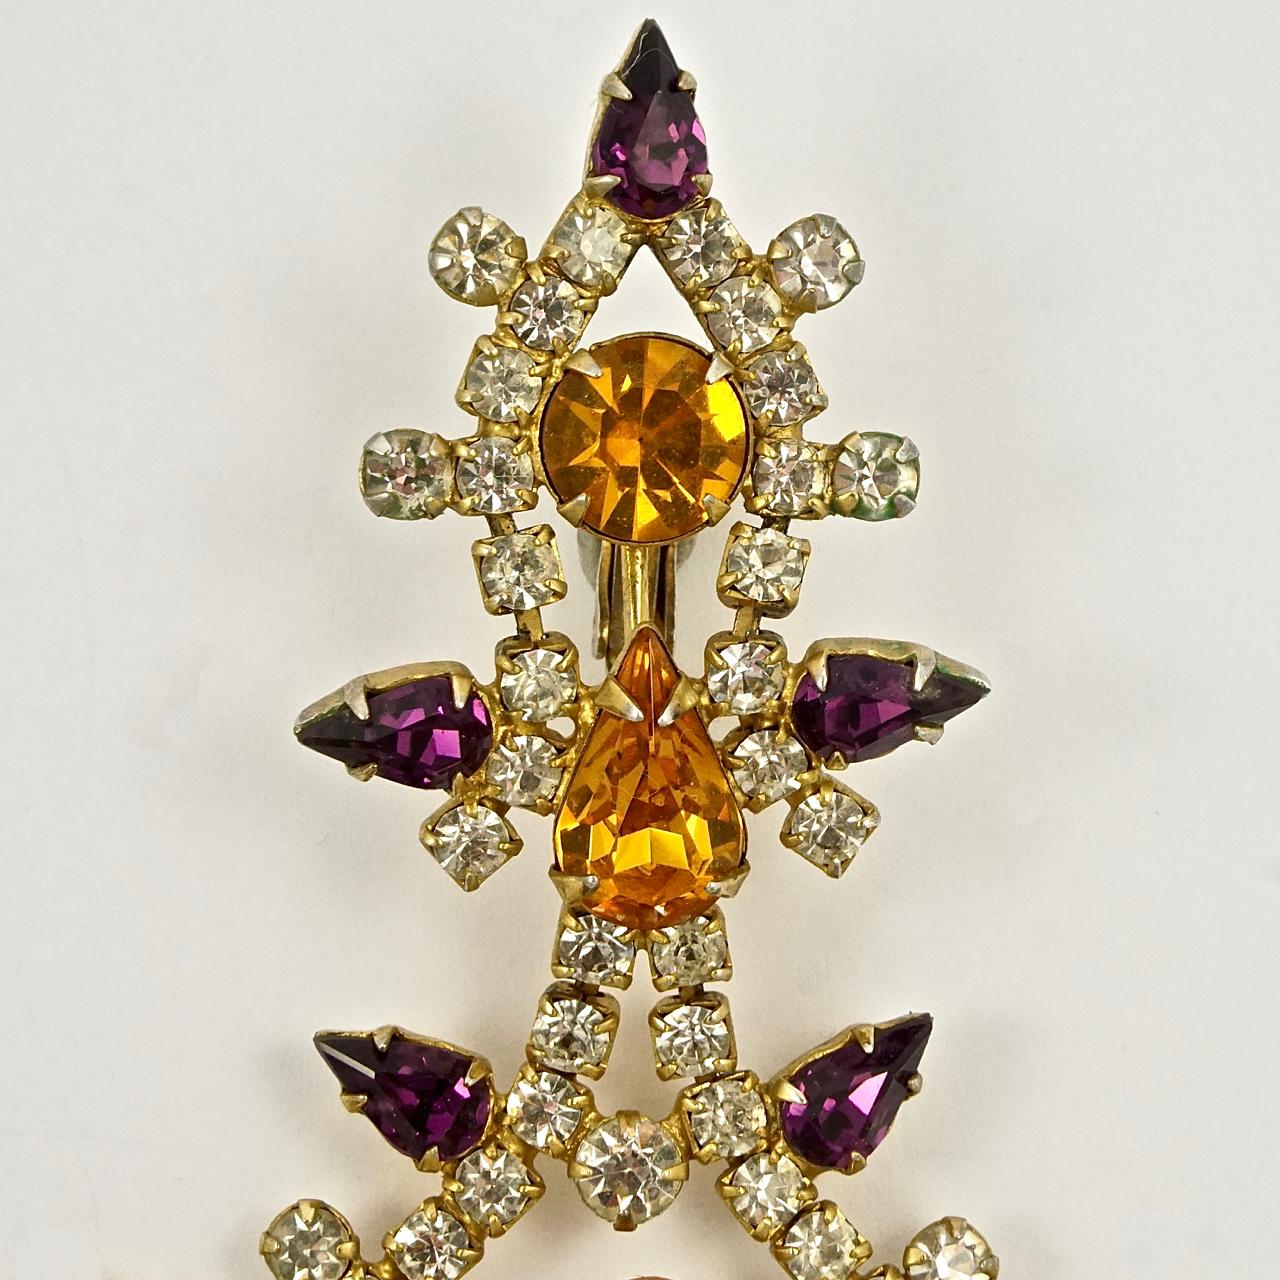 Mimi di N fabulous gold plated chandelier clip on earrings, set with amethyst, citrine and clear rhinestones in a lovely ornate design finishing with a single clear droplet. Measuring length approximately 9 cm / 3.5 inches by maximum width 6 cm /